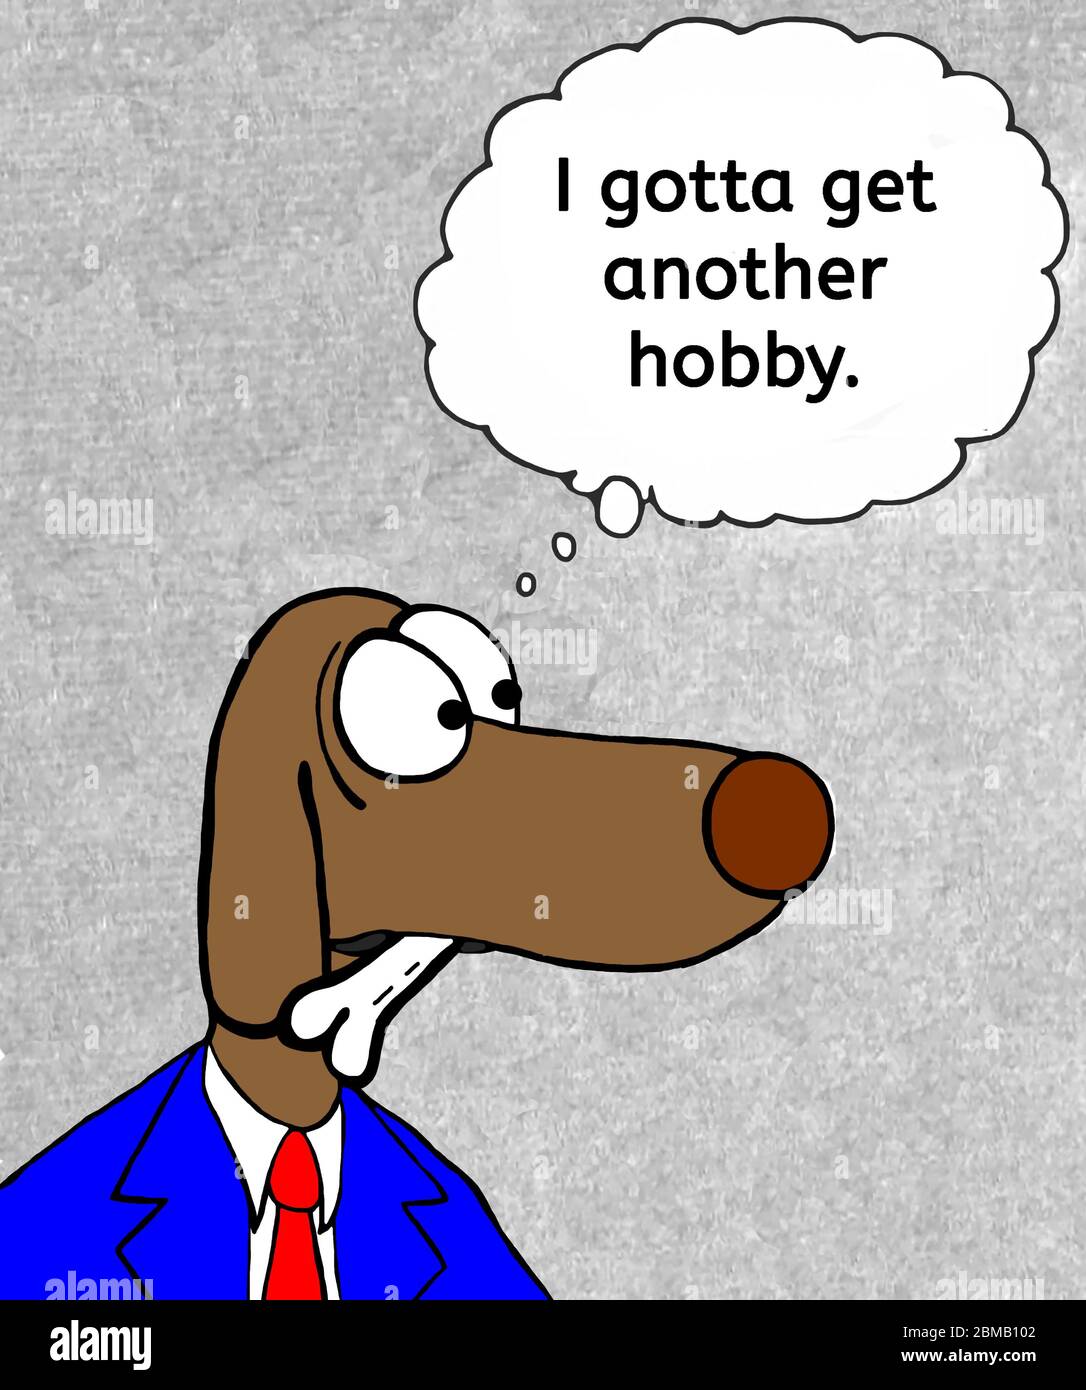 Color cartoon of business dog chewing a bone and thinking he has to get a new hobby. Stock Photo